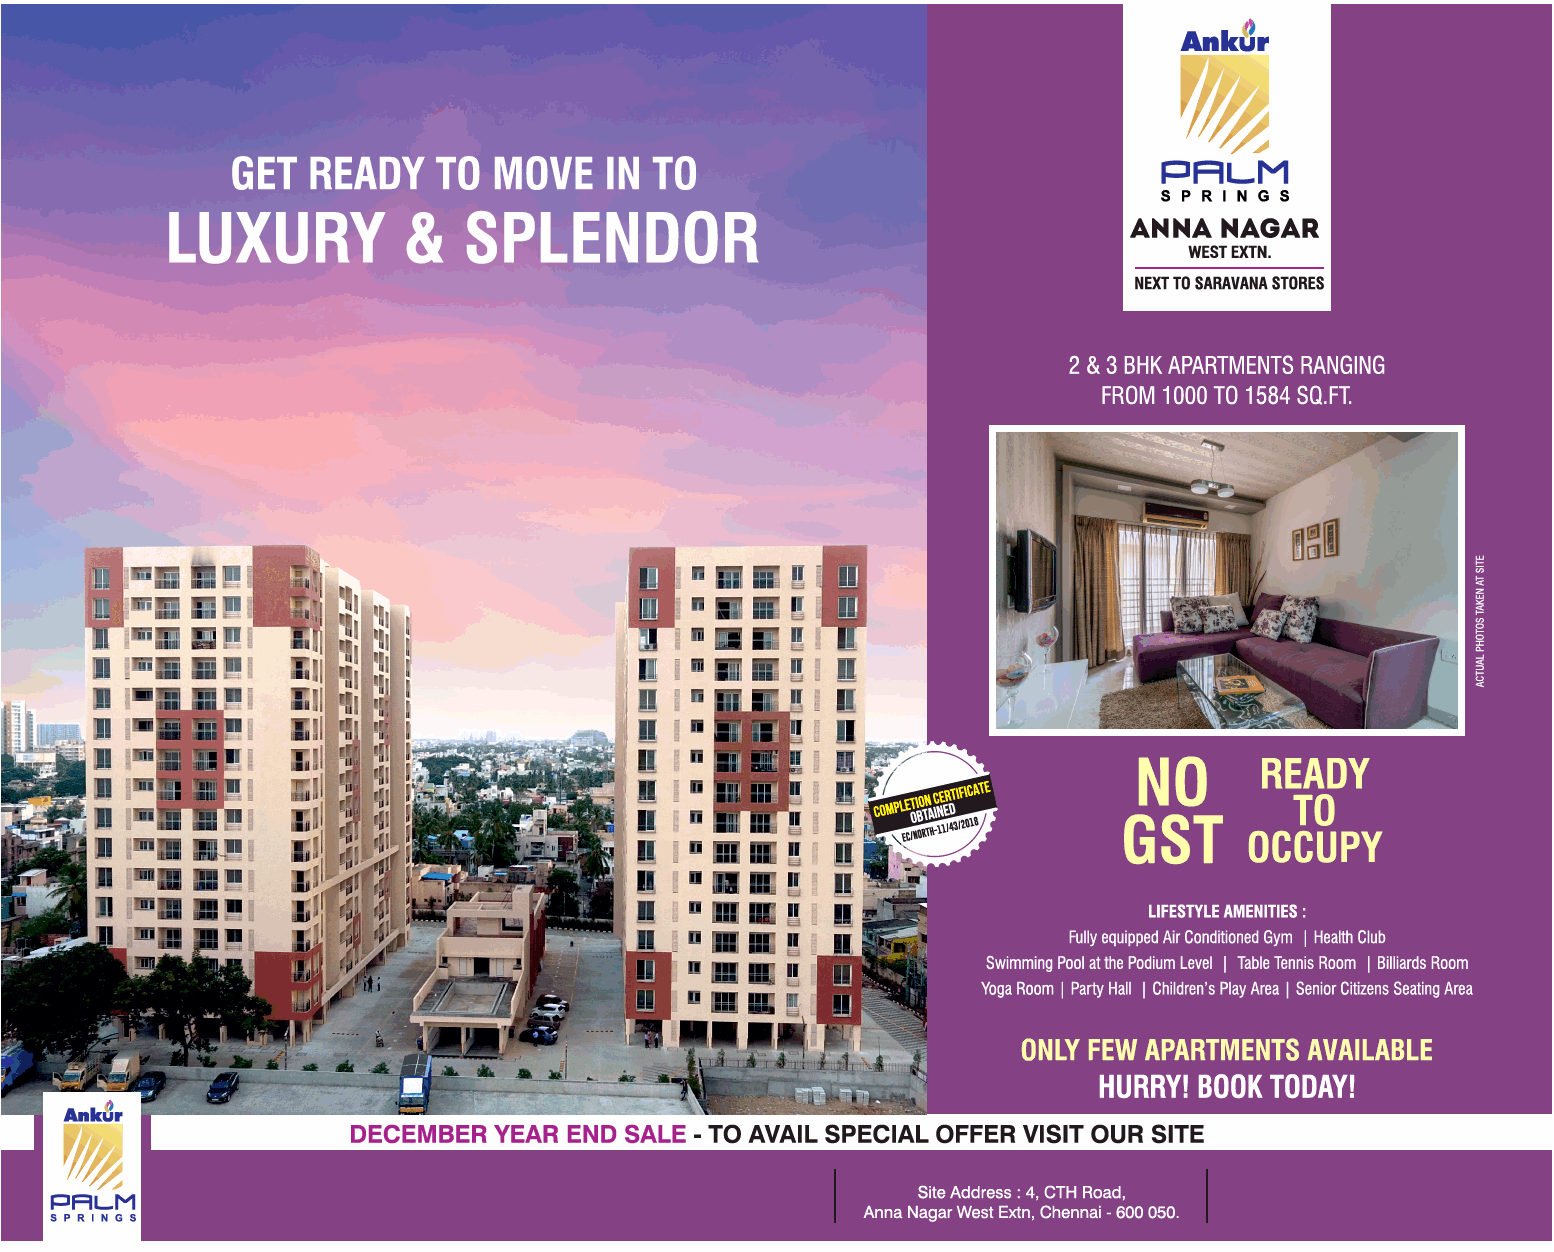 Get ready to move in to luxury & splendor at Ankur Palm Springs, Chennai Update